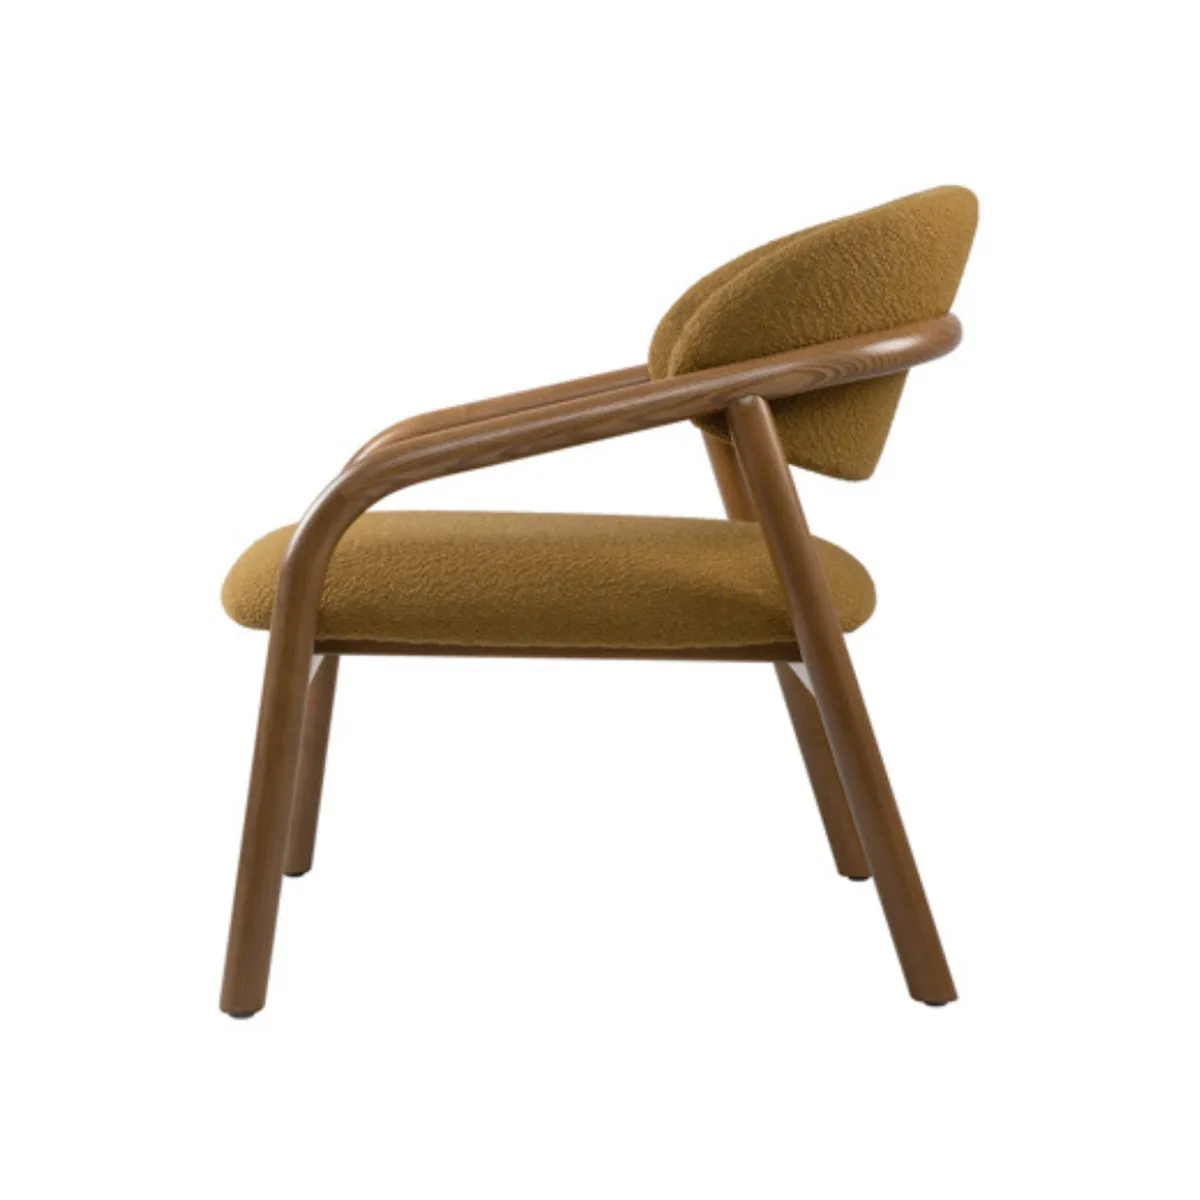 Adeline lounge chair 2